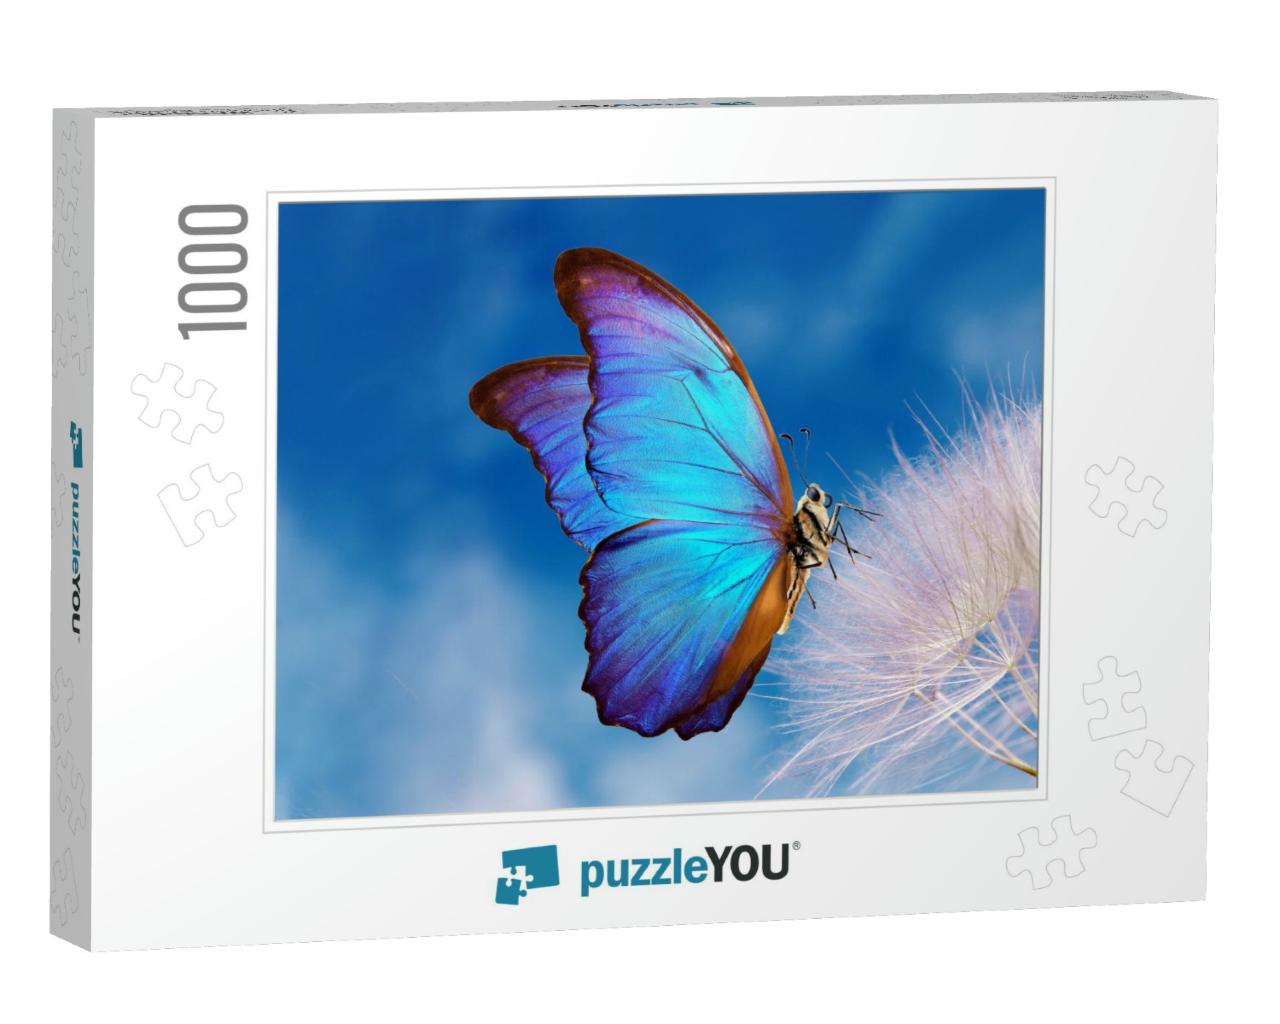 Natural Pastel Background. Morpho Butterfly & Dandelion... Jigsaw Puzzle with 1000 pieces